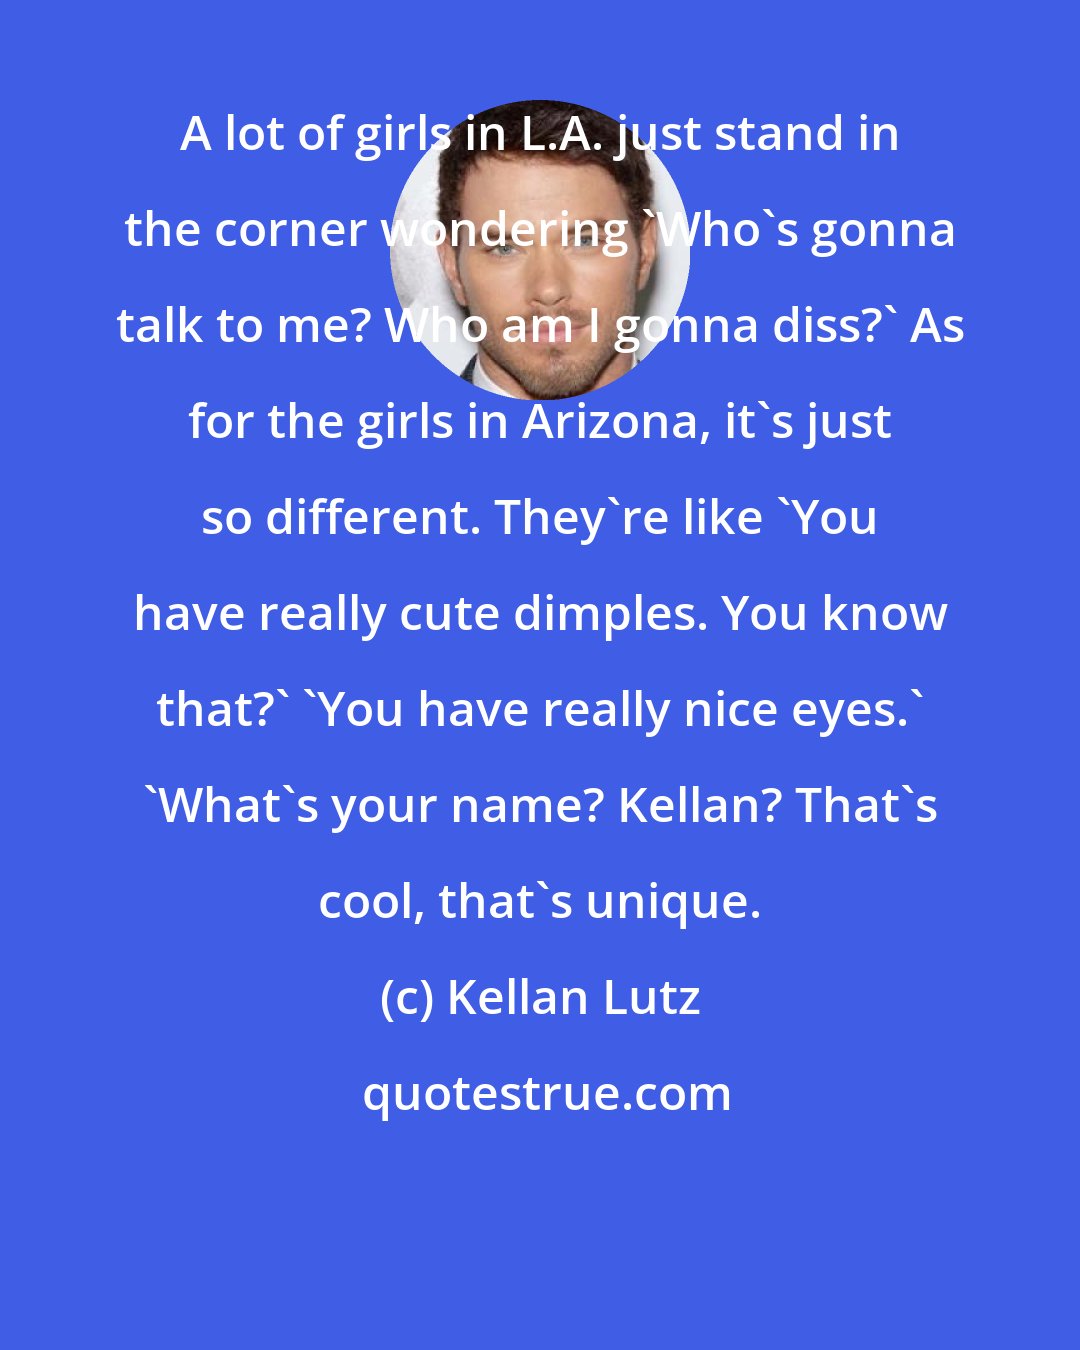 Kellan Lutz: A lot of girls in L.A. just stand in the corner wondering 'Who's gonna talk to me? Who am I gonna diss?' As for the girls in Arizona, it's just so different. They're like 'You have really cute dimples. You know that?' 'You have really nice eyes.' 'What's your name? Kellan? That's cool, that's unique.